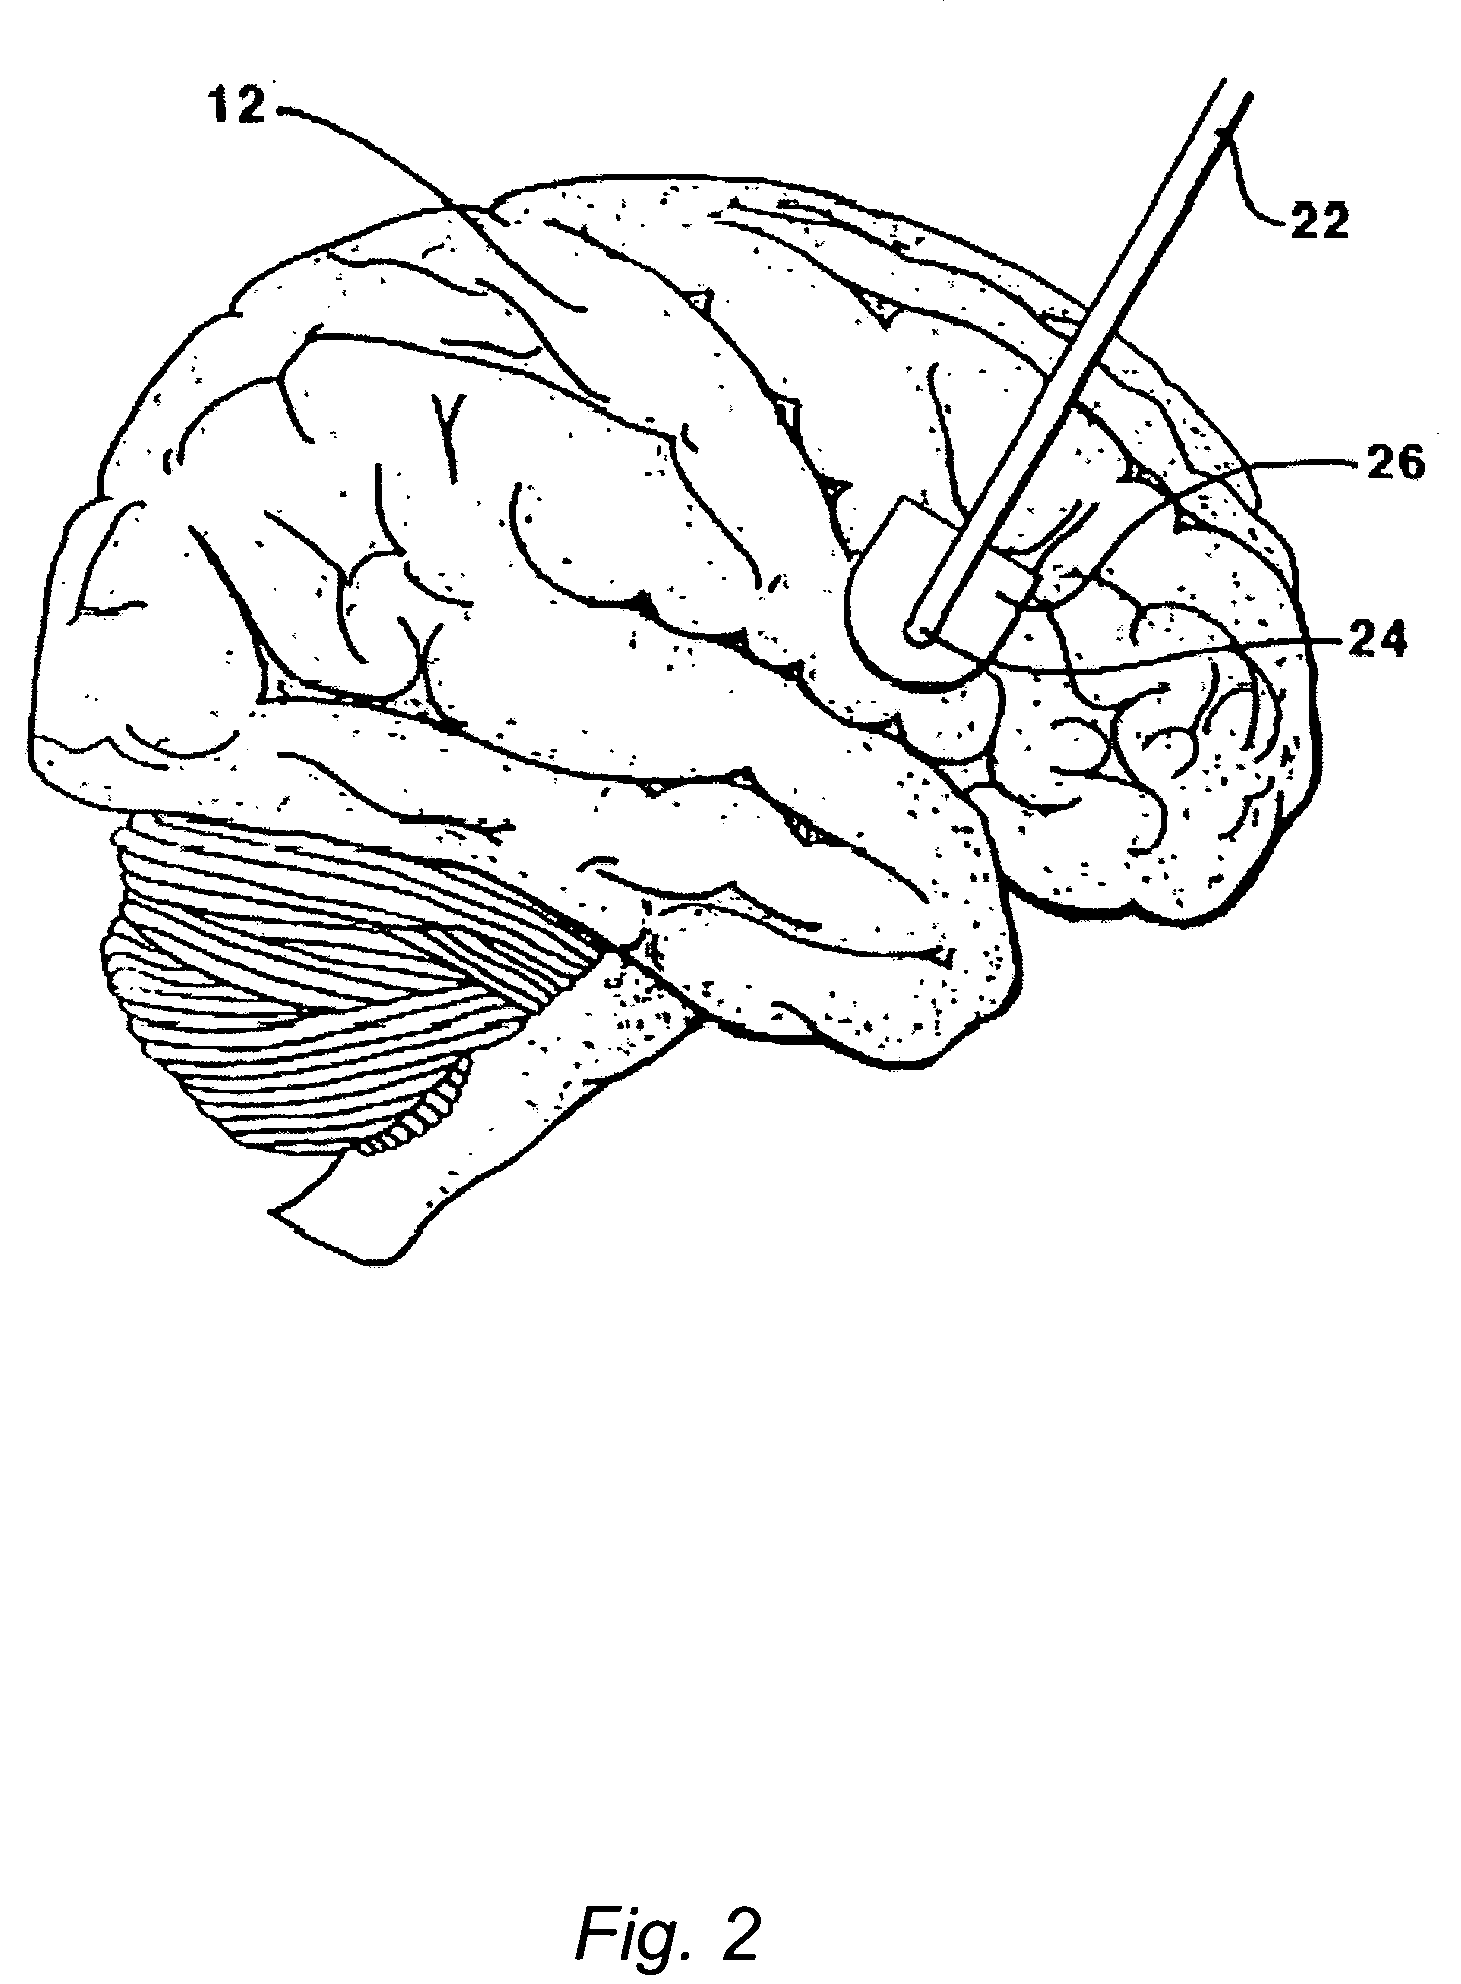 Methods and systems for treatment of neurological diseases of the central nervous system